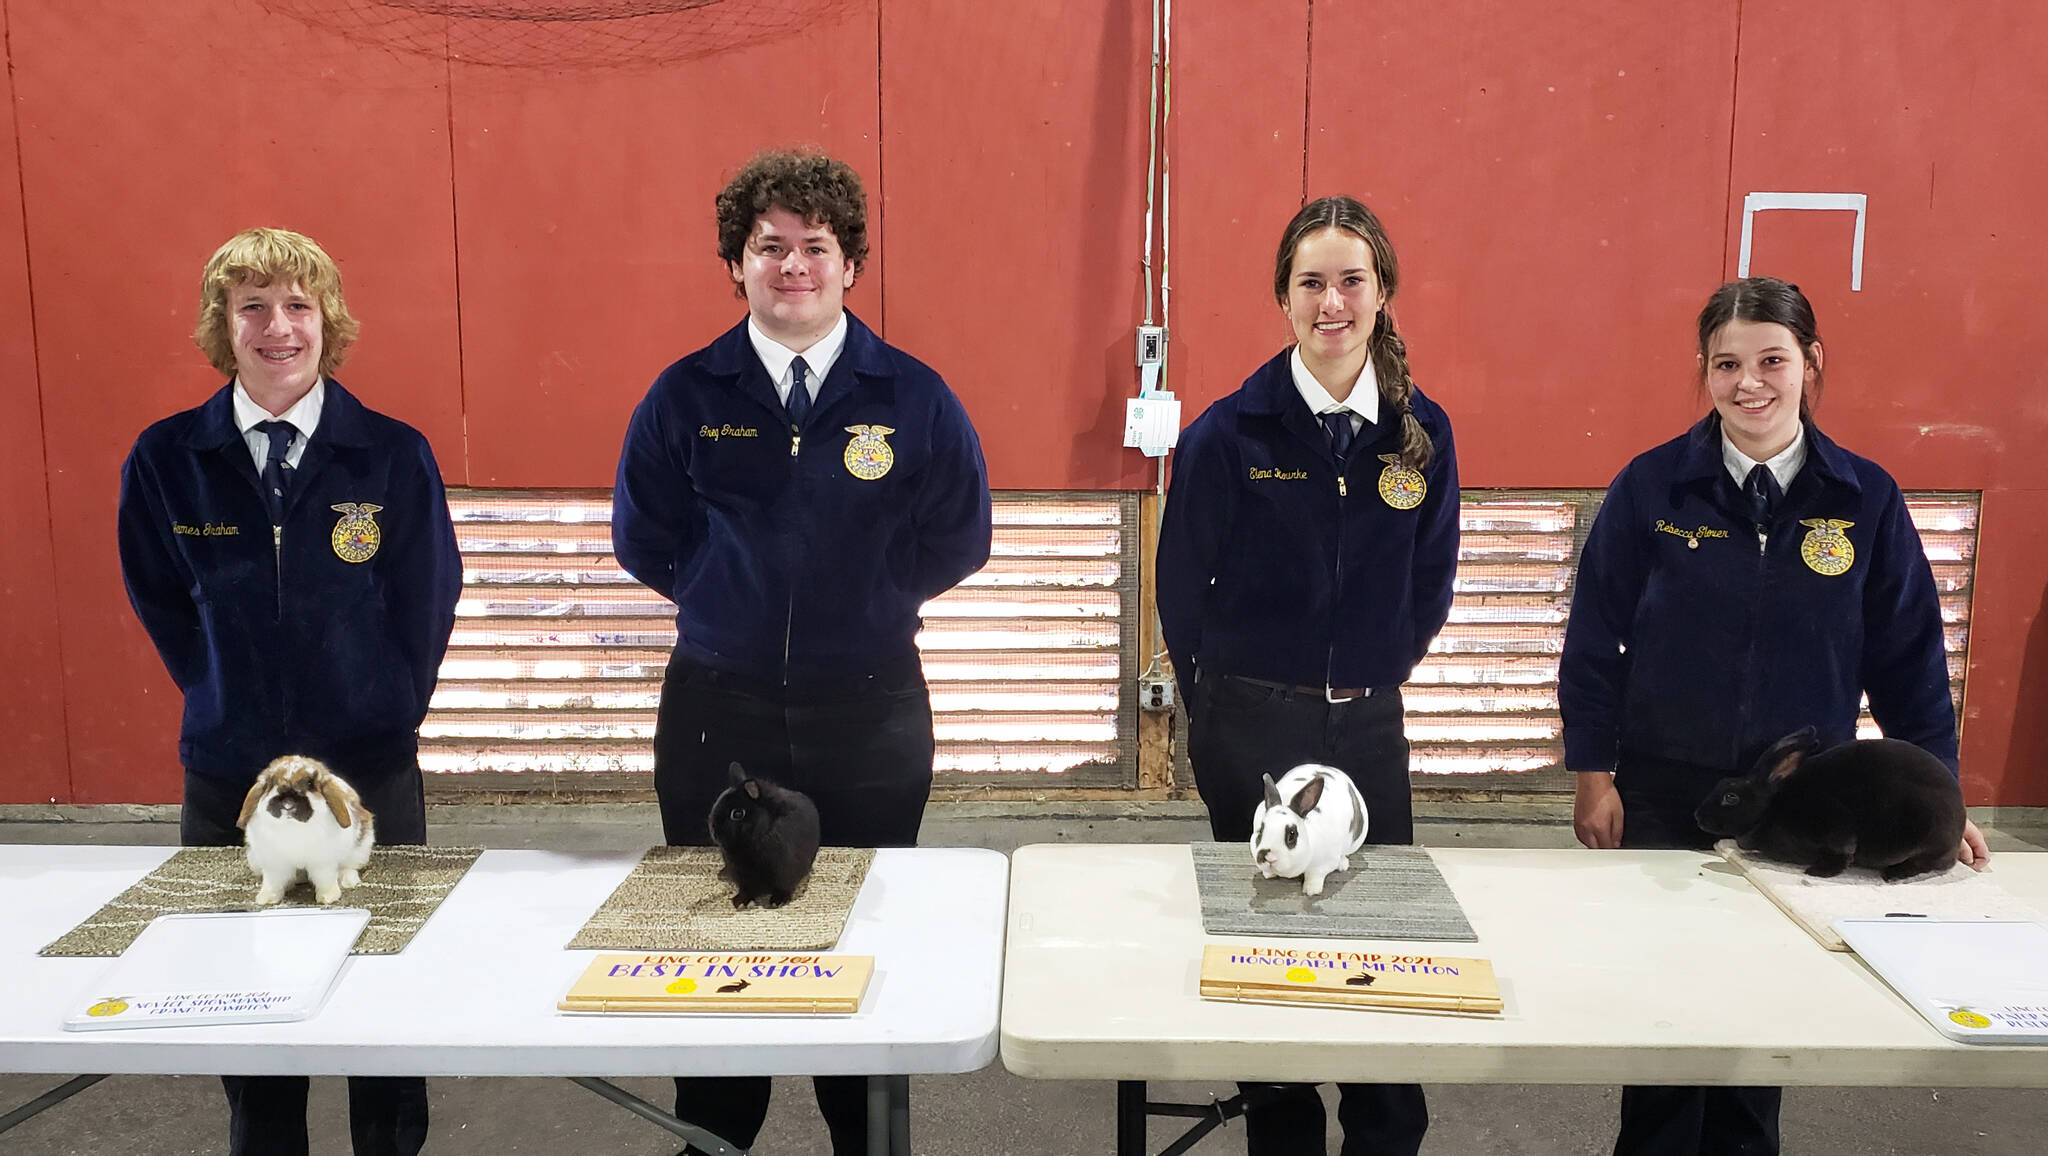 Photo Courtesy of the Snoqualmie Valley School District
Mount Si FFA students present their rabbits, from left: James Graham, Greg Graham, Elena Rourke, and Rebecca Glover.